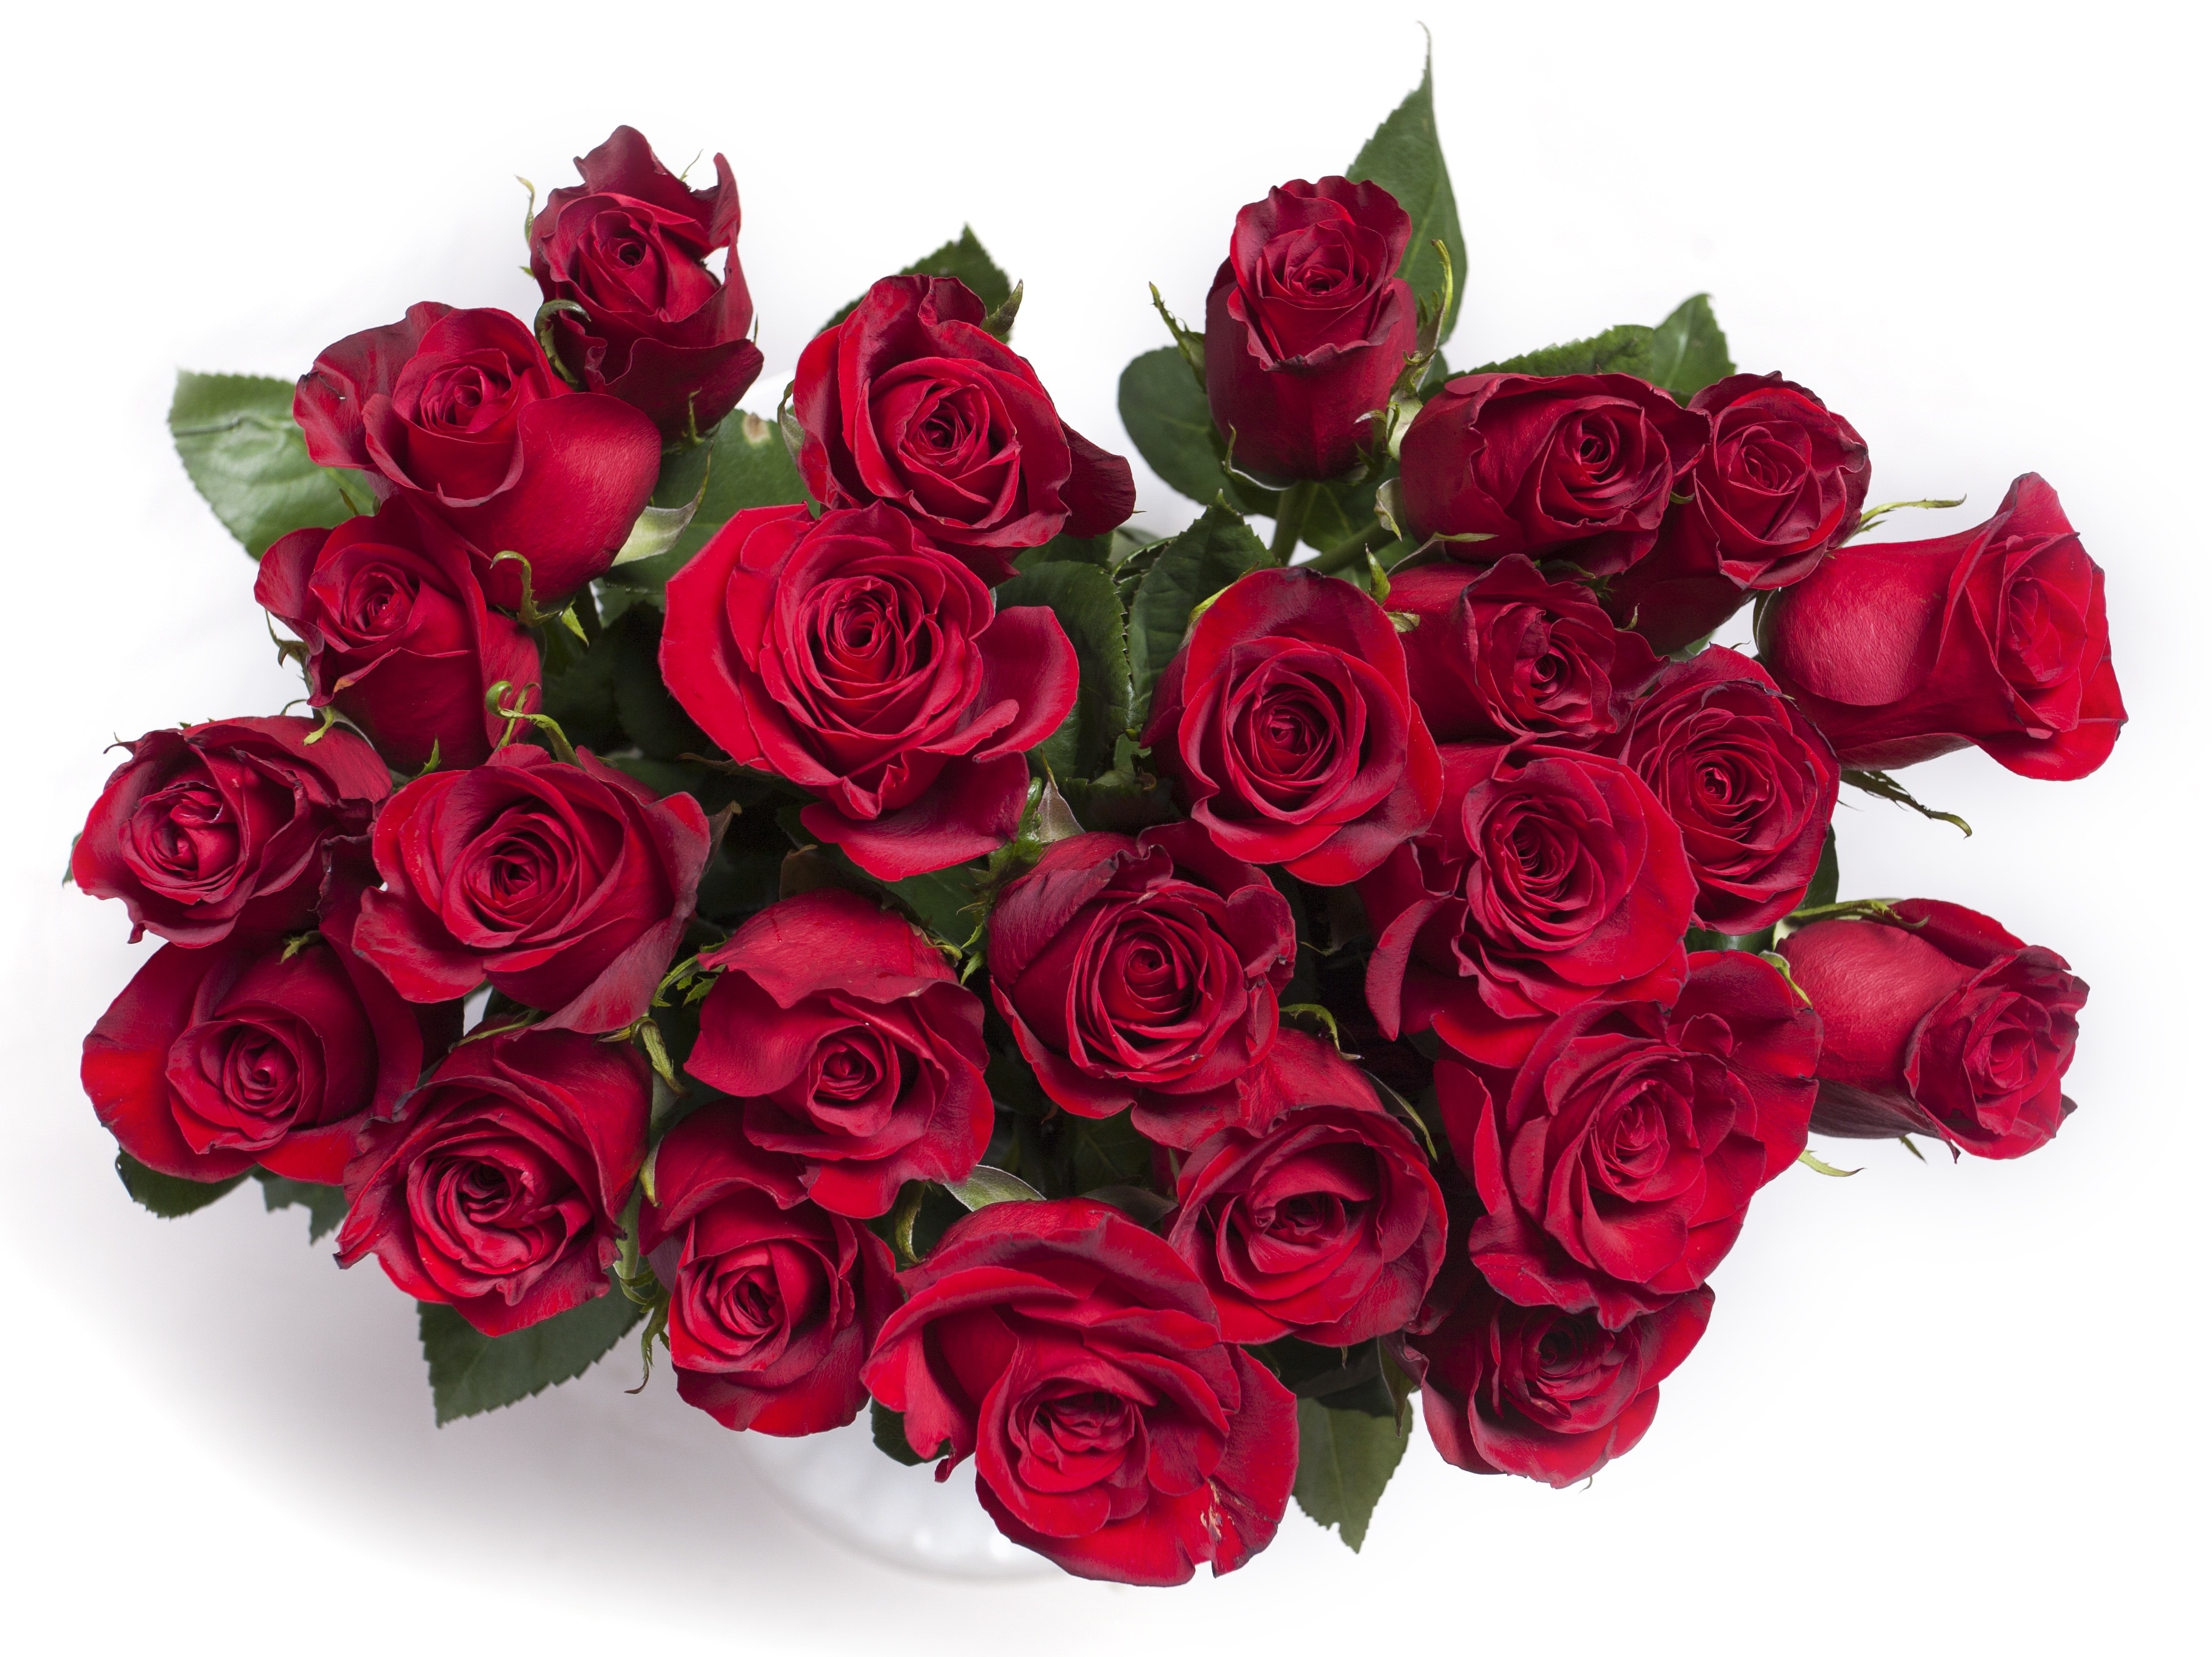 Flowers, Red, Bouquet, Red Roses, Roses, rose - flower, flower